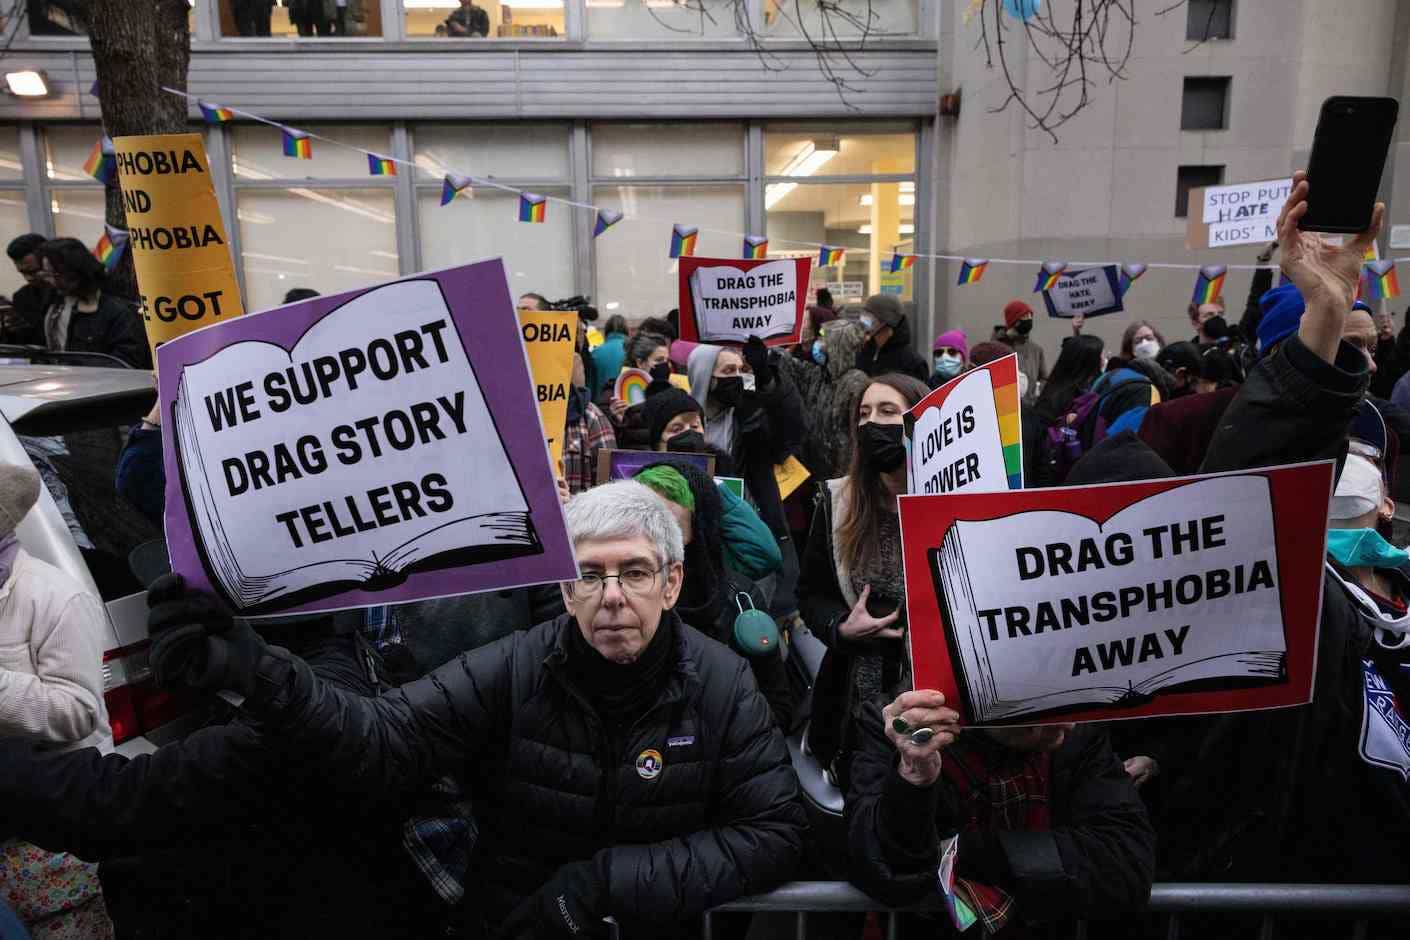 Demonstrators gather for a protest in support of the Drag Story Hour outside the Queens Public Library on December 29, 2022 in New York.